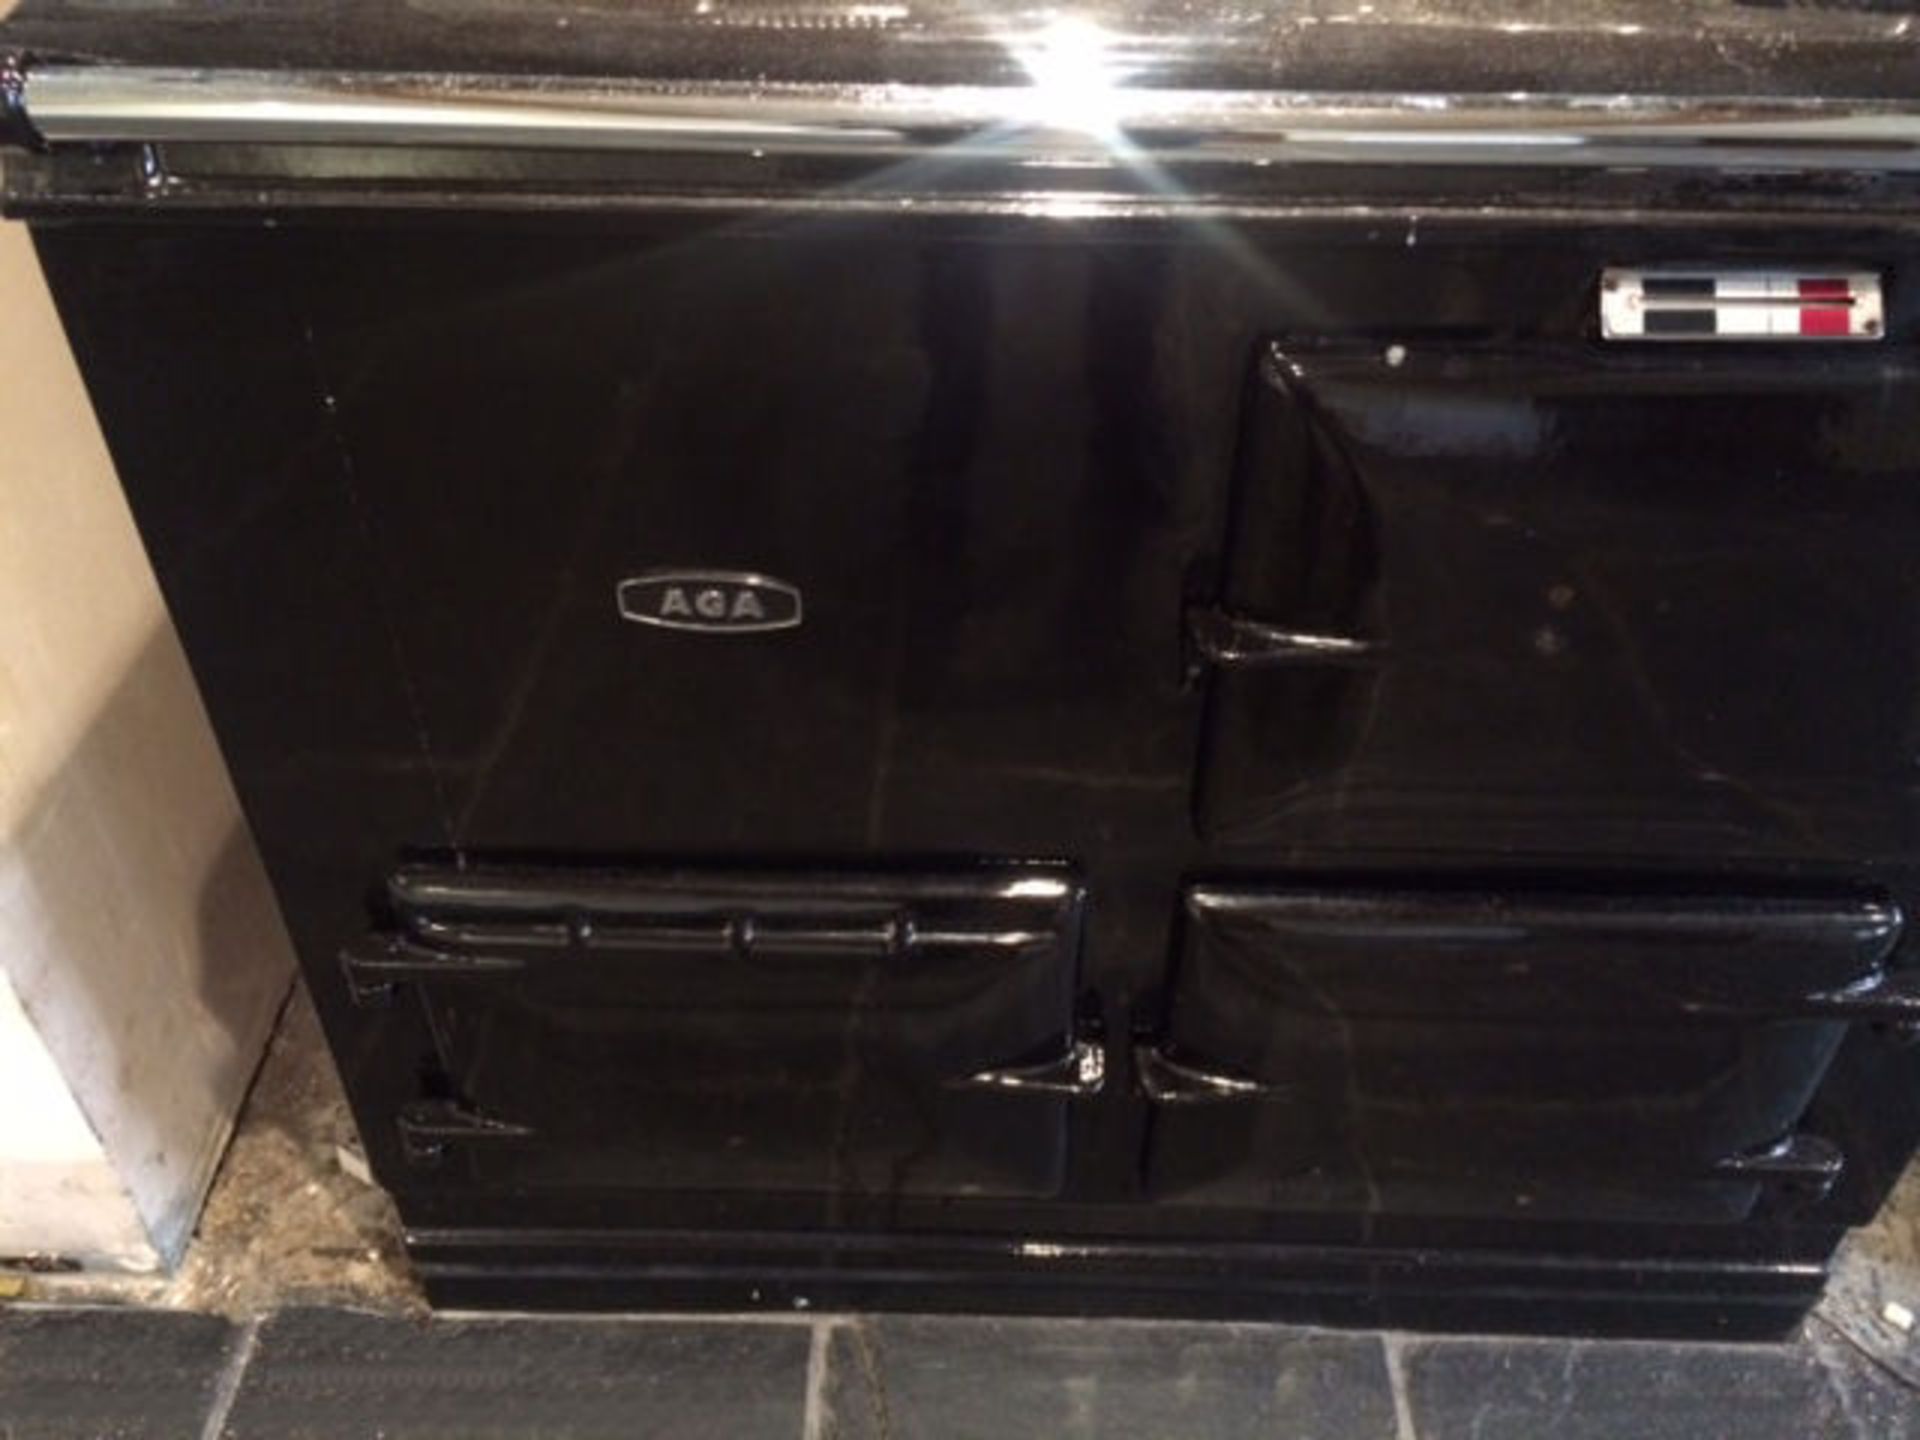 1 x Aga 2-Oven Gas Range Cooker - Cast Iron With Black Enamel Finish - Preowned In Good Working Cond - Bild 8 aus 10